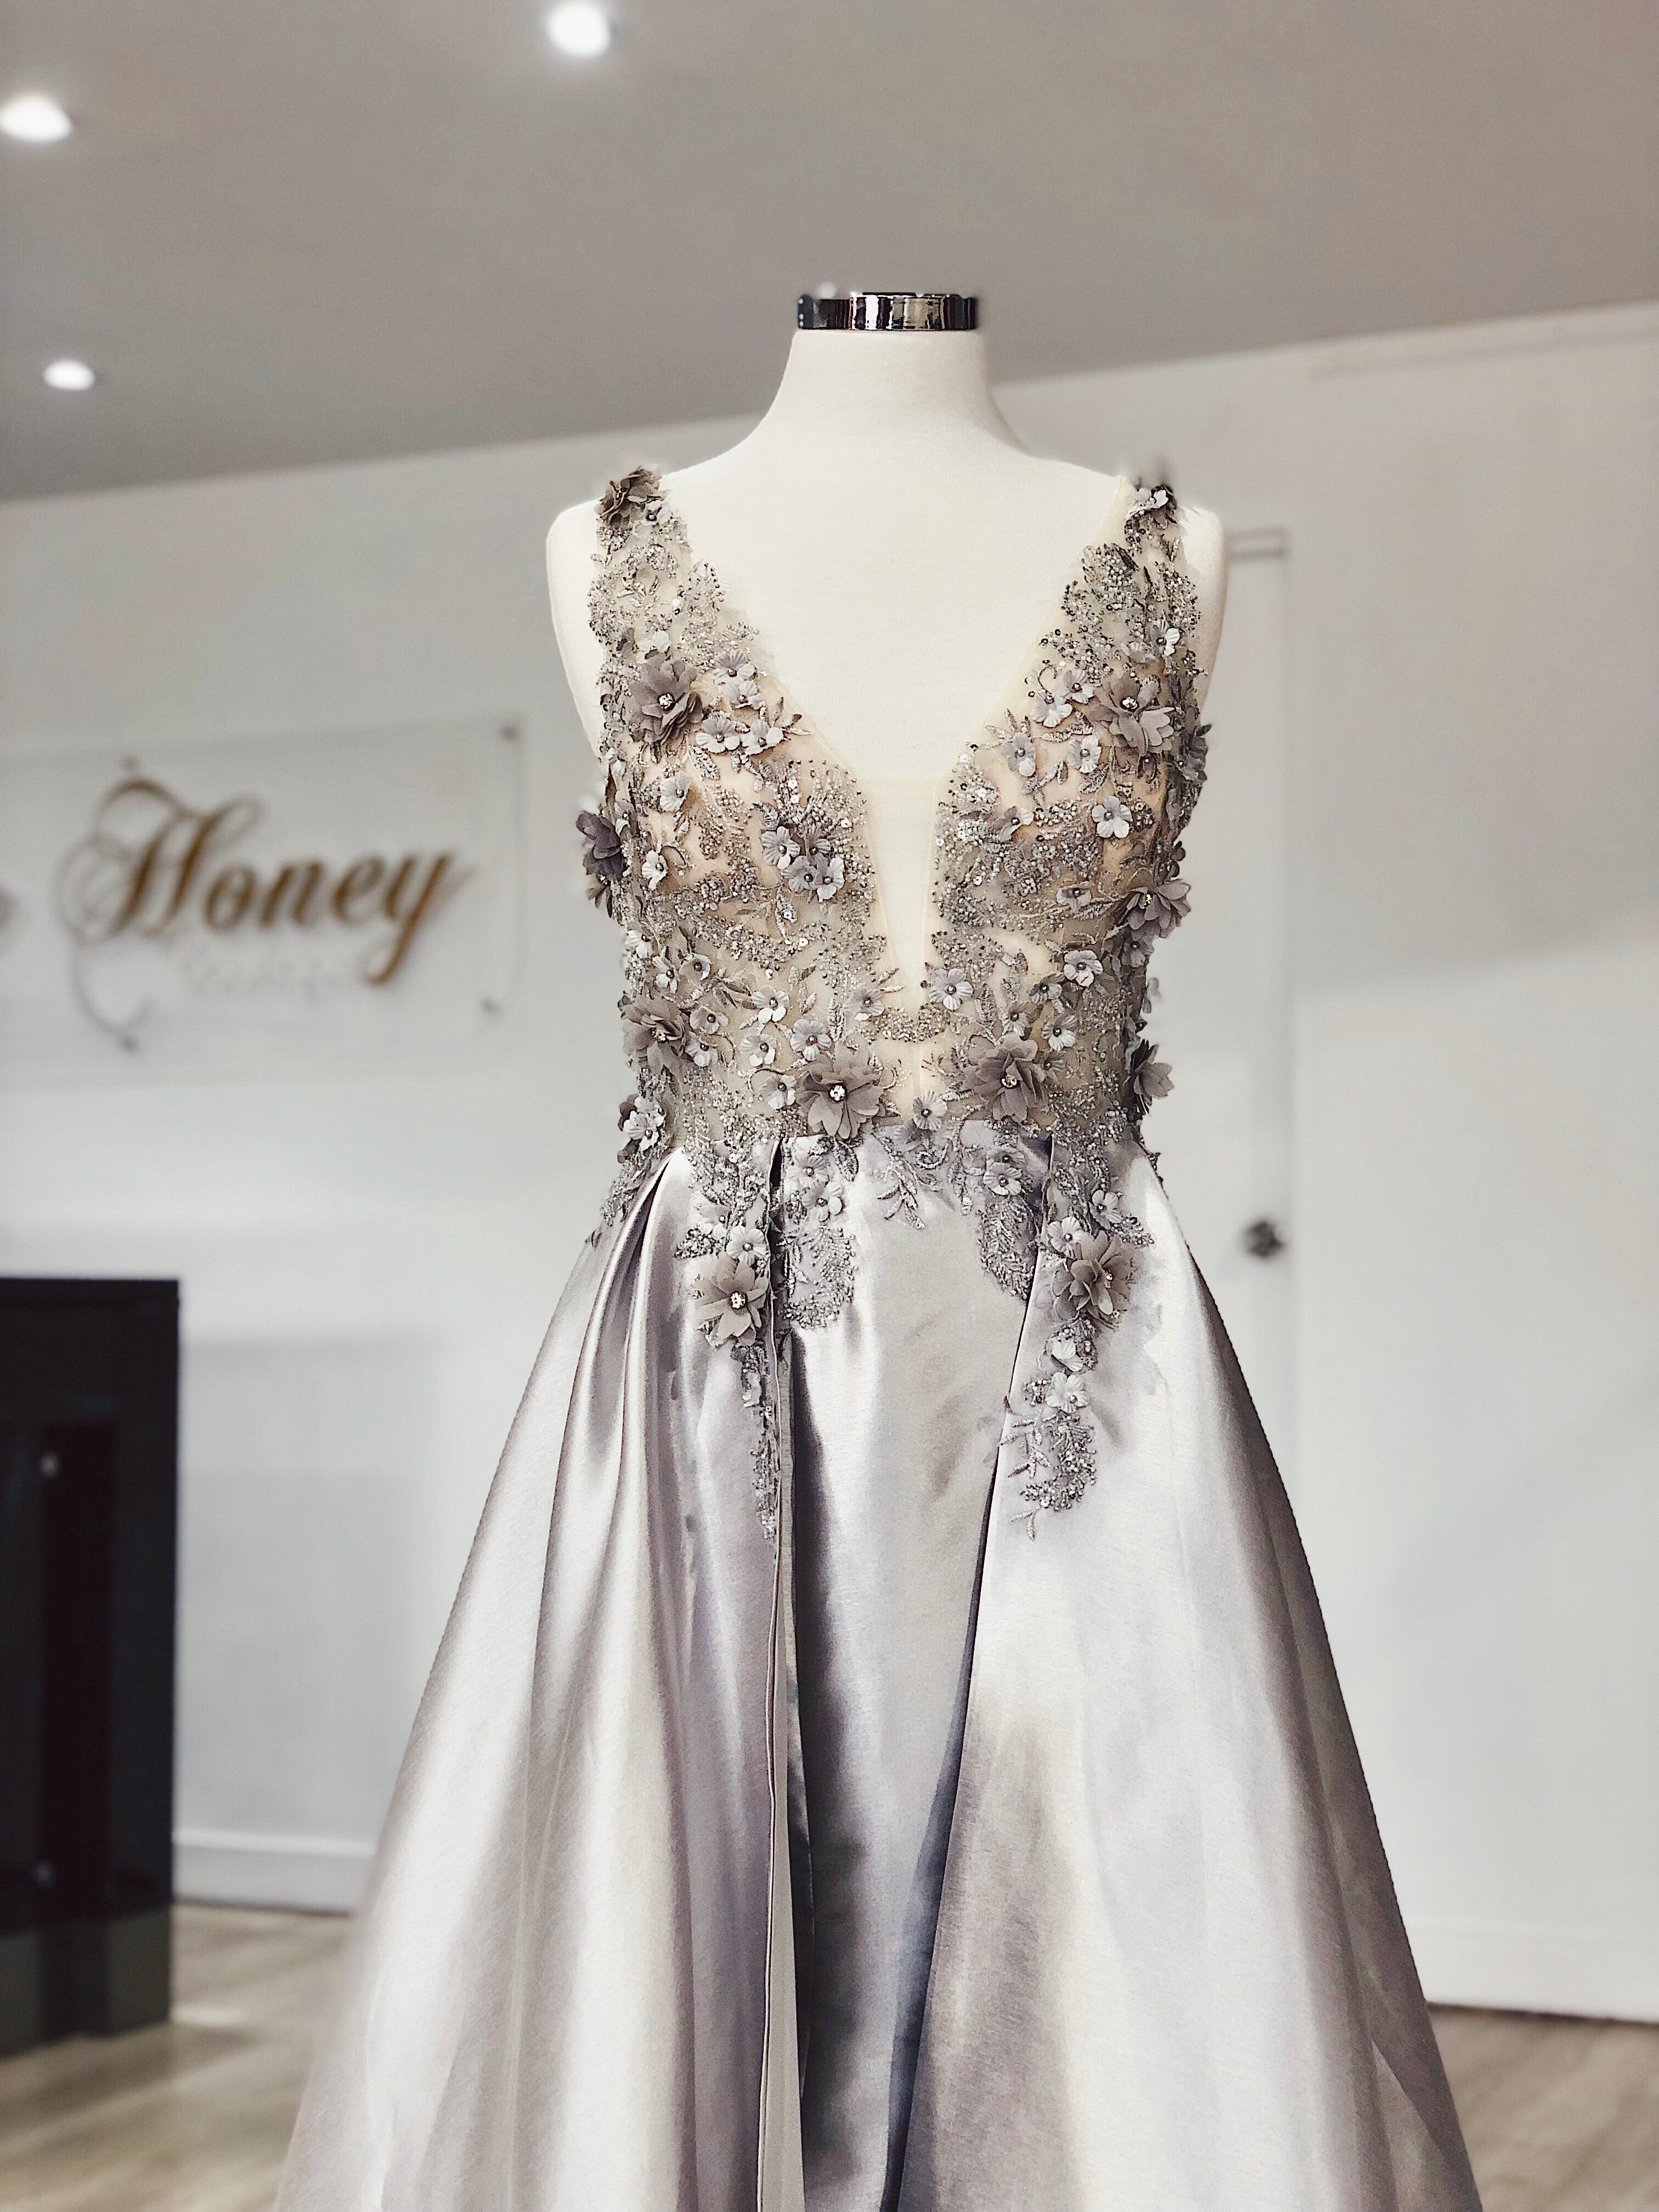 Honey Couture GENESIS 3D Flowers Tulle Formal Gown Dress Honey Couture Custom$ AfterPay Humm ZipPay LayBuy Sezzle